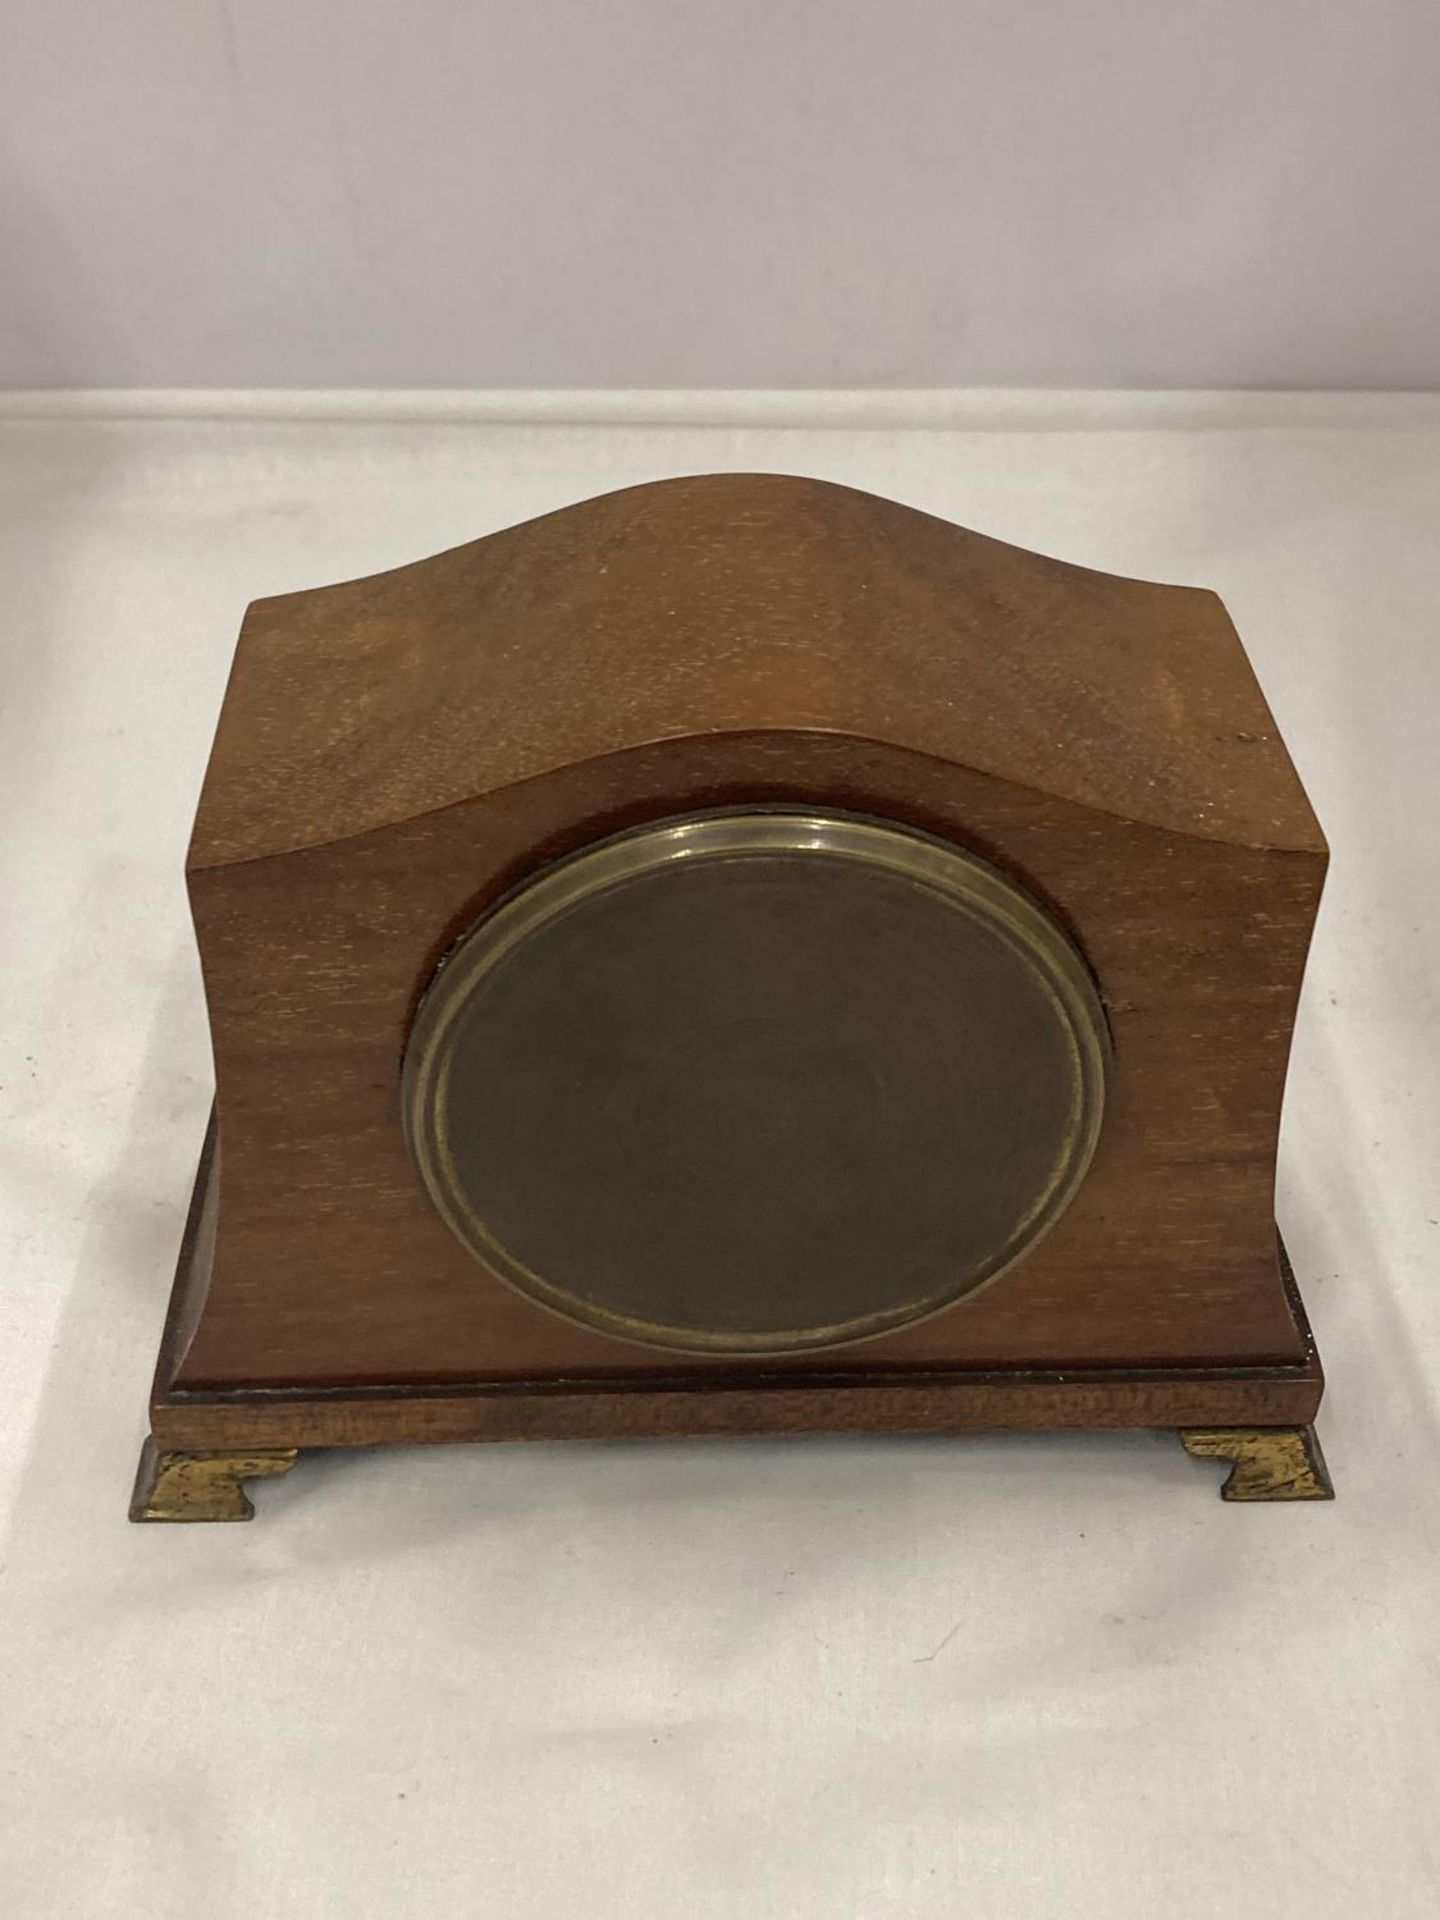 A SWISS MADE INLAID MANTLE CLOCK SEEN WORKING BUT NO WARRANTY - Image 3 of 5